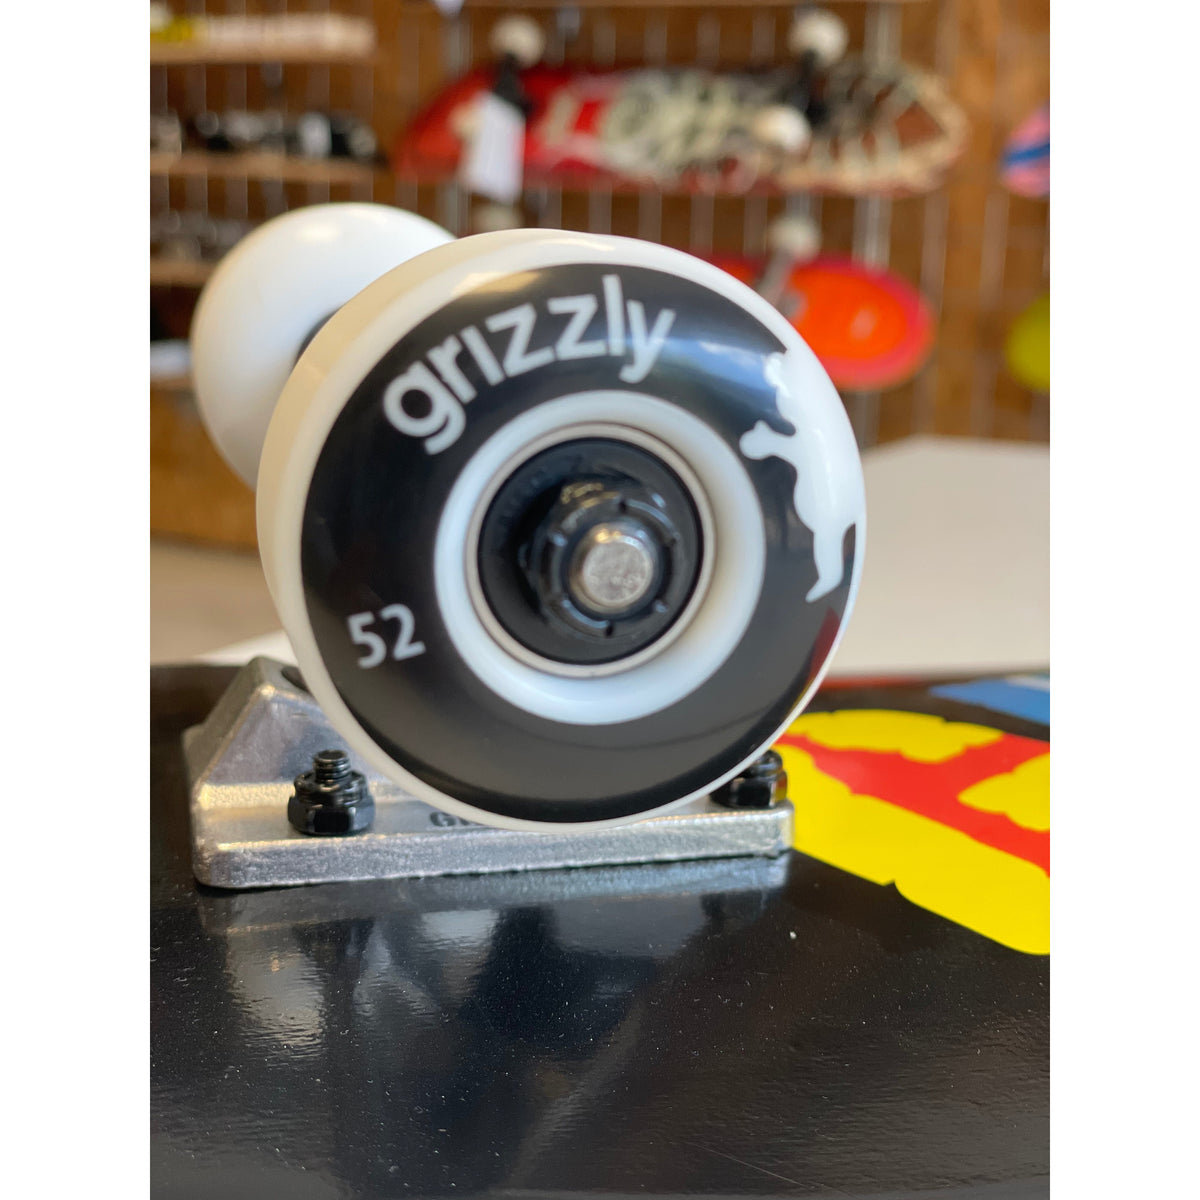 Grizzly Colour Wheel Complete Skateboard 7.75"